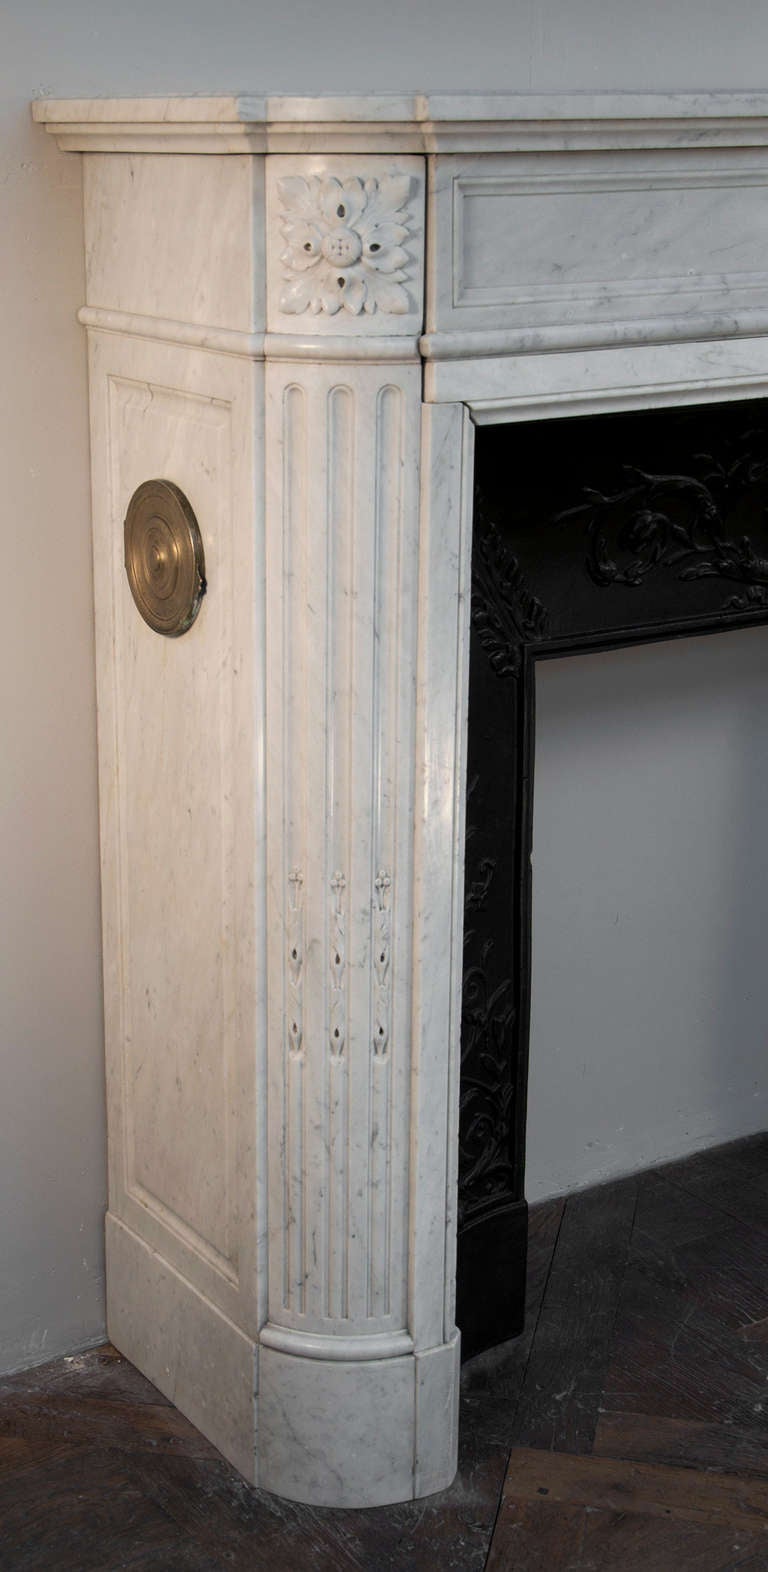 Antique Louis Xvi Style Fireplace Made out of Carrara Marble, 19th Century 4